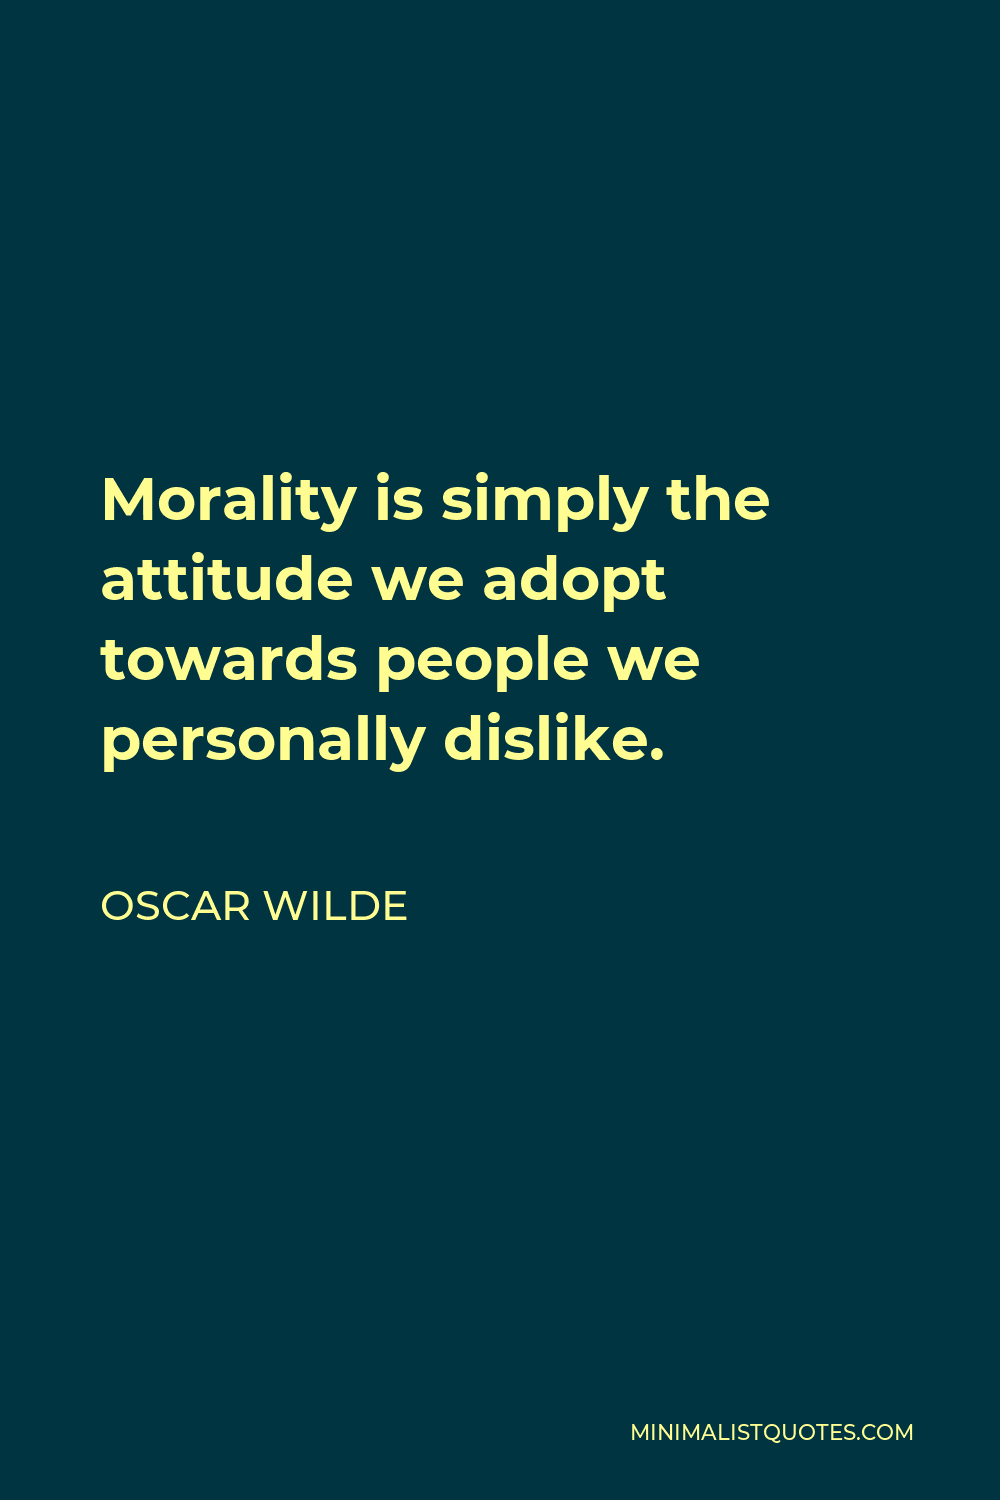 Oscar Wilde Quote - Morality is simply the attitude we adopt towards people we personally dislike.